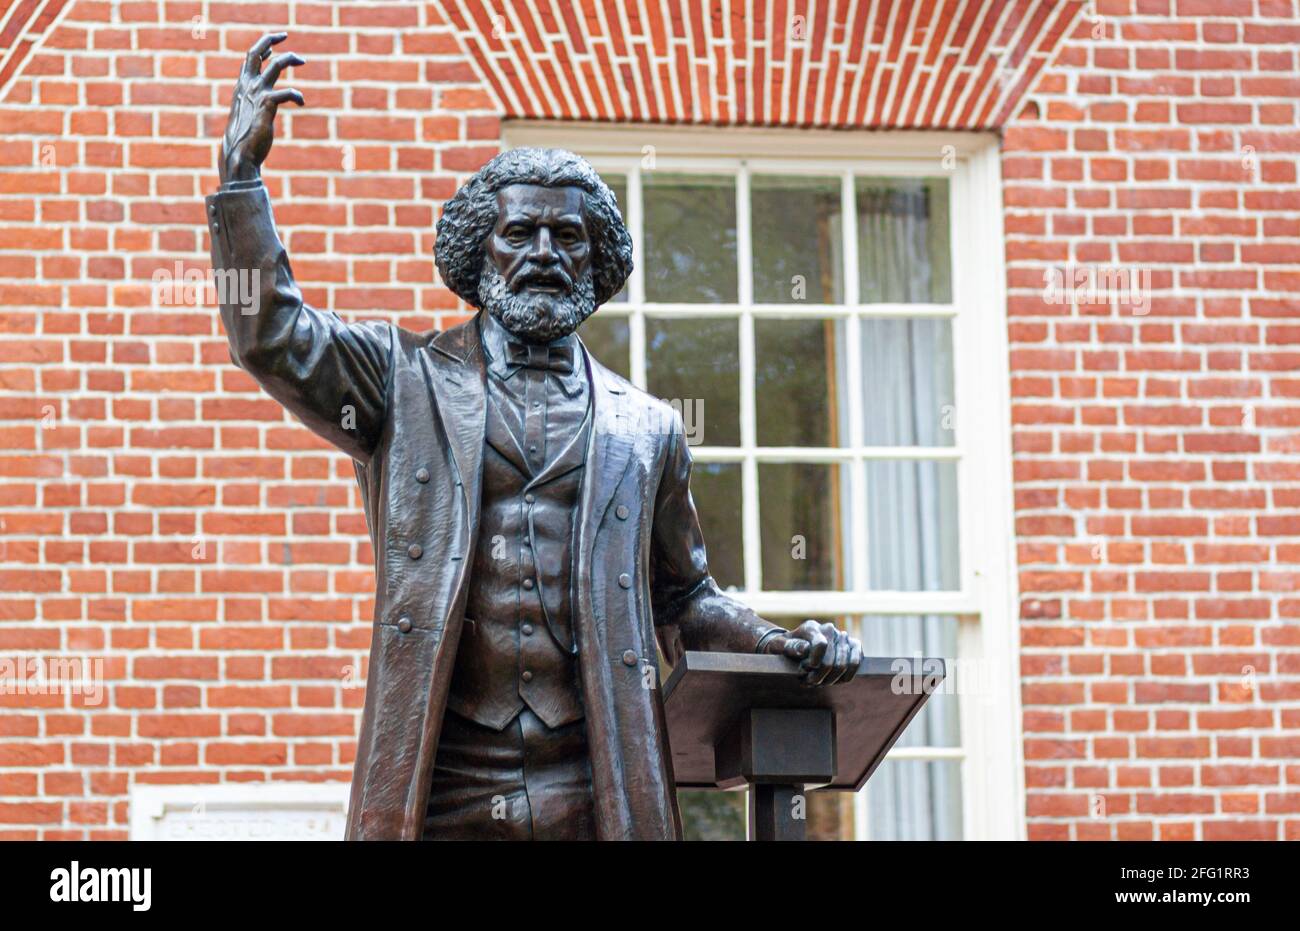 04-16-2021 Easton, MD, USA: Statue of the famous reformist abolitionist African American leader Frederick Douglass, in front of the Talbot County Cour Stock Photo